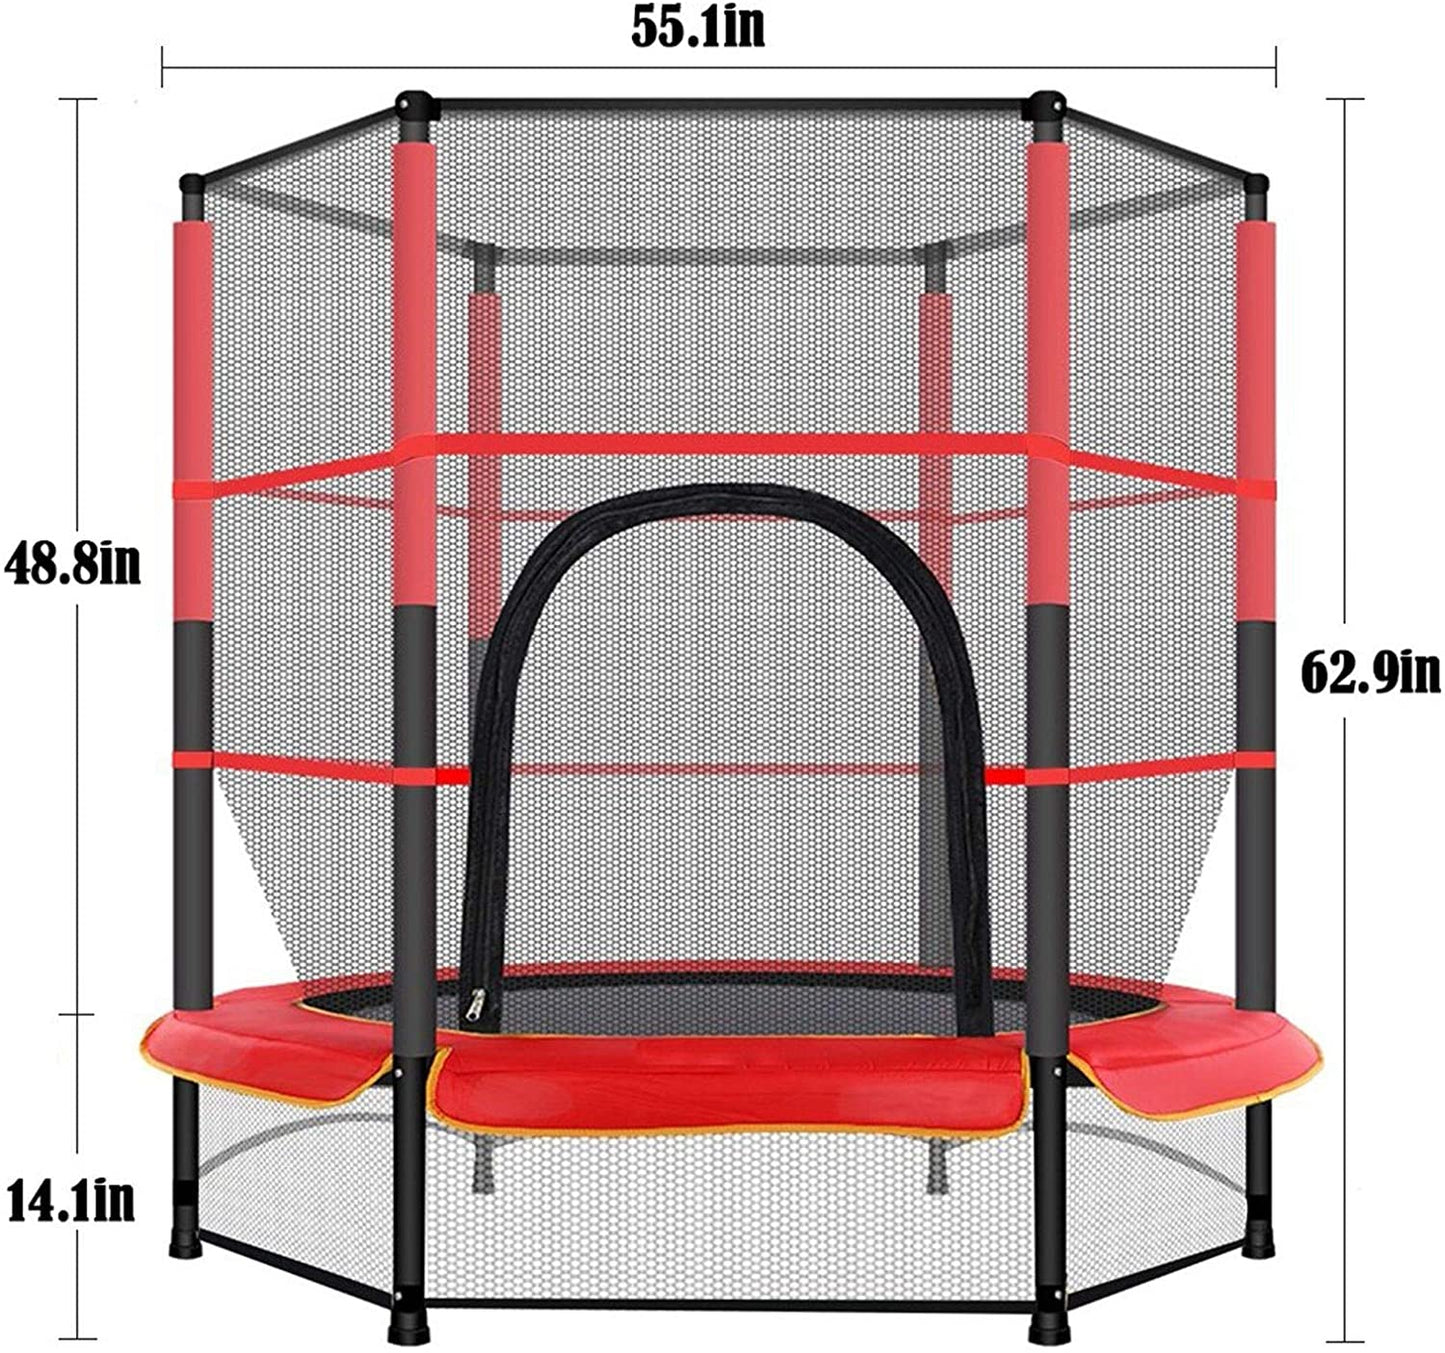 COOLBABY BBC02 5 FT Kids Trampoline - COOL BABY